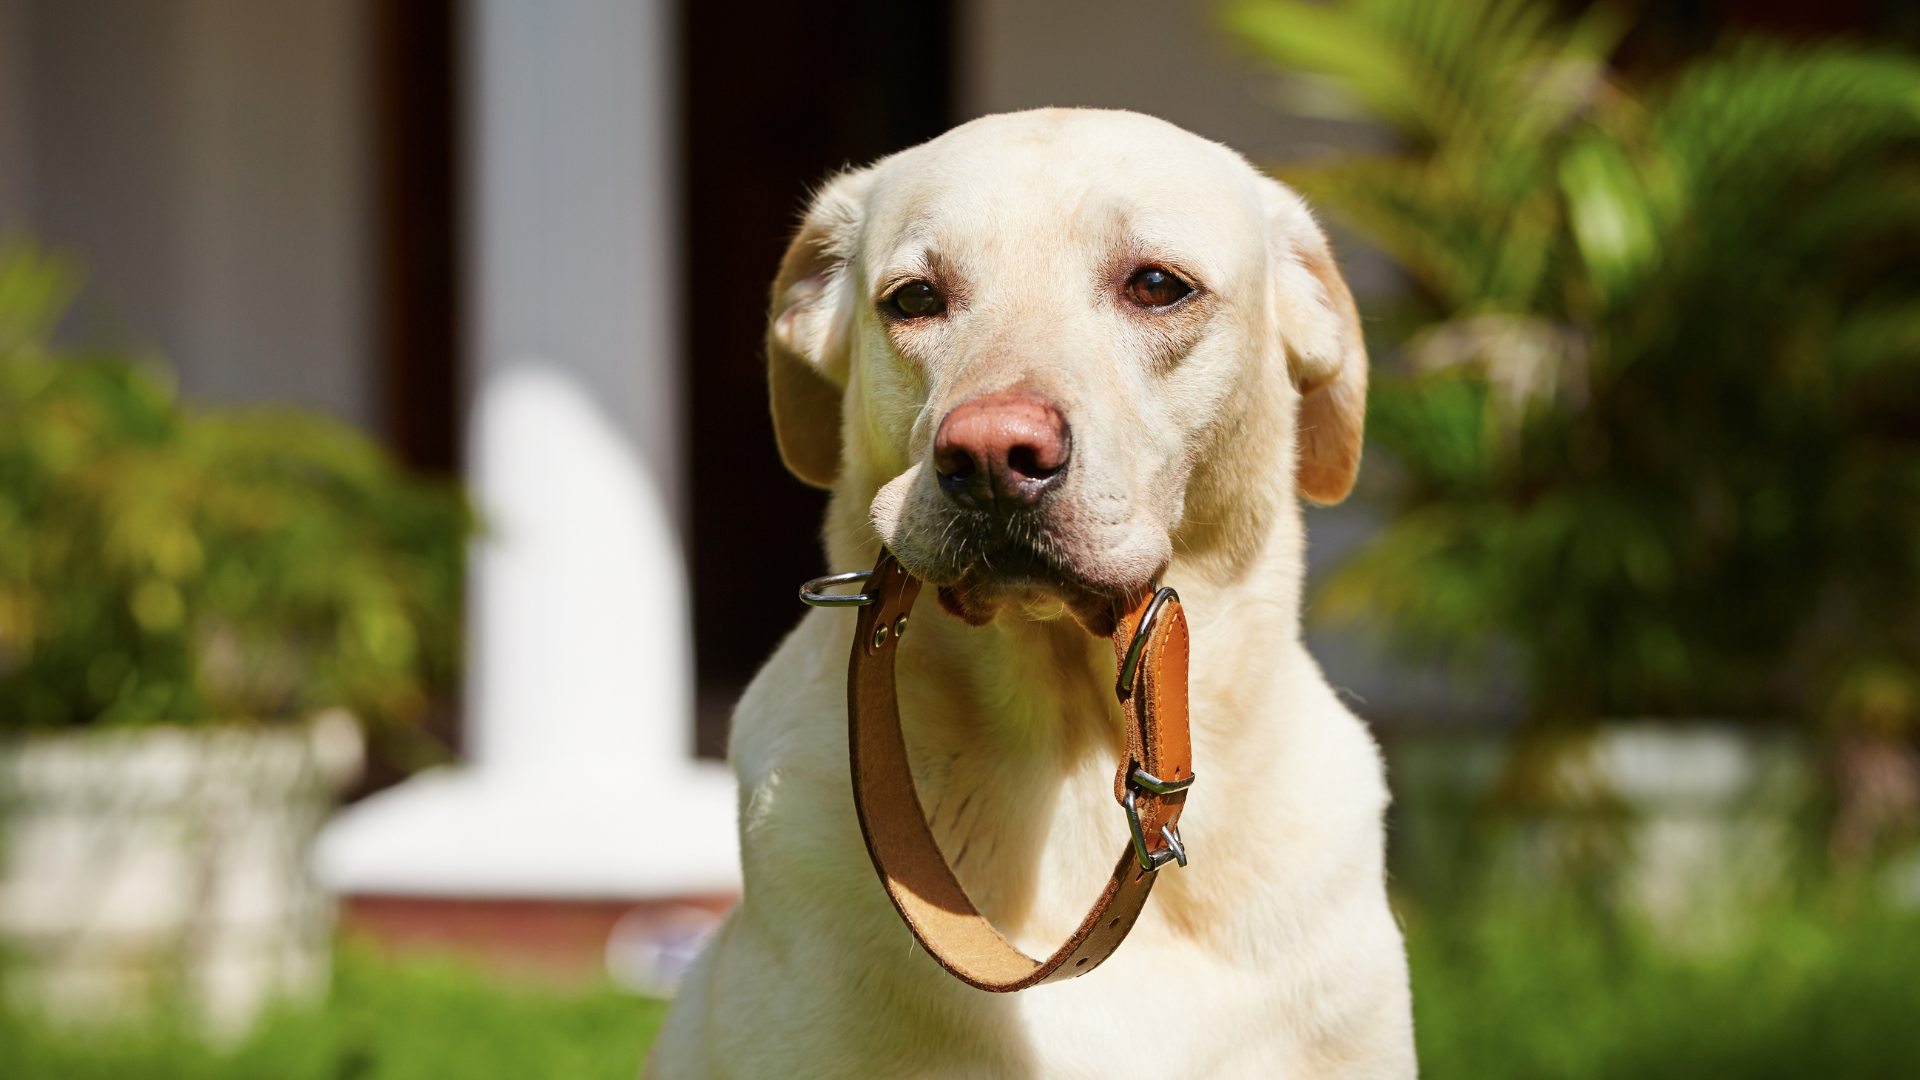 Collar Sores on Dogs: Causes, Treatment, and Prevention